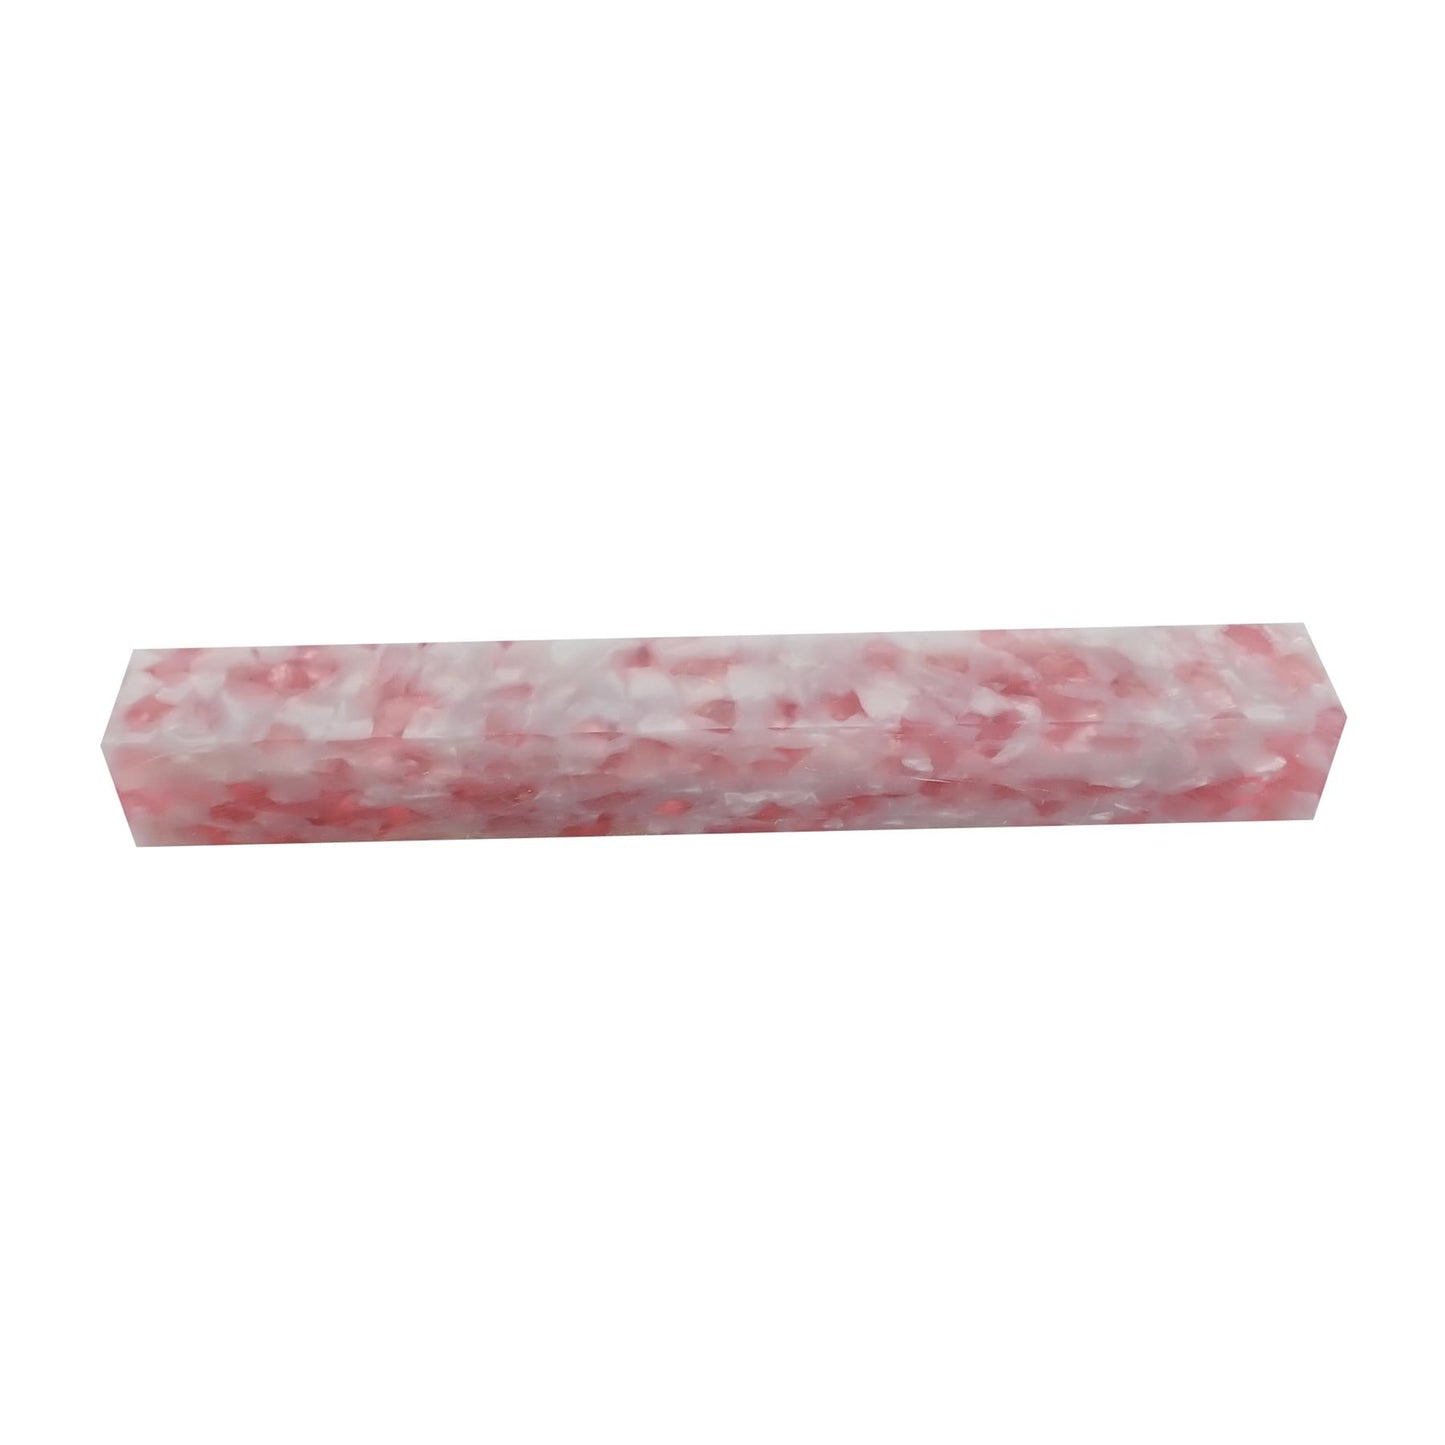 Turners' Mill Antique Pink Pearloid Cellulose Acetate Pen Blank - 150x20x20mm (6x3/4x3/4")